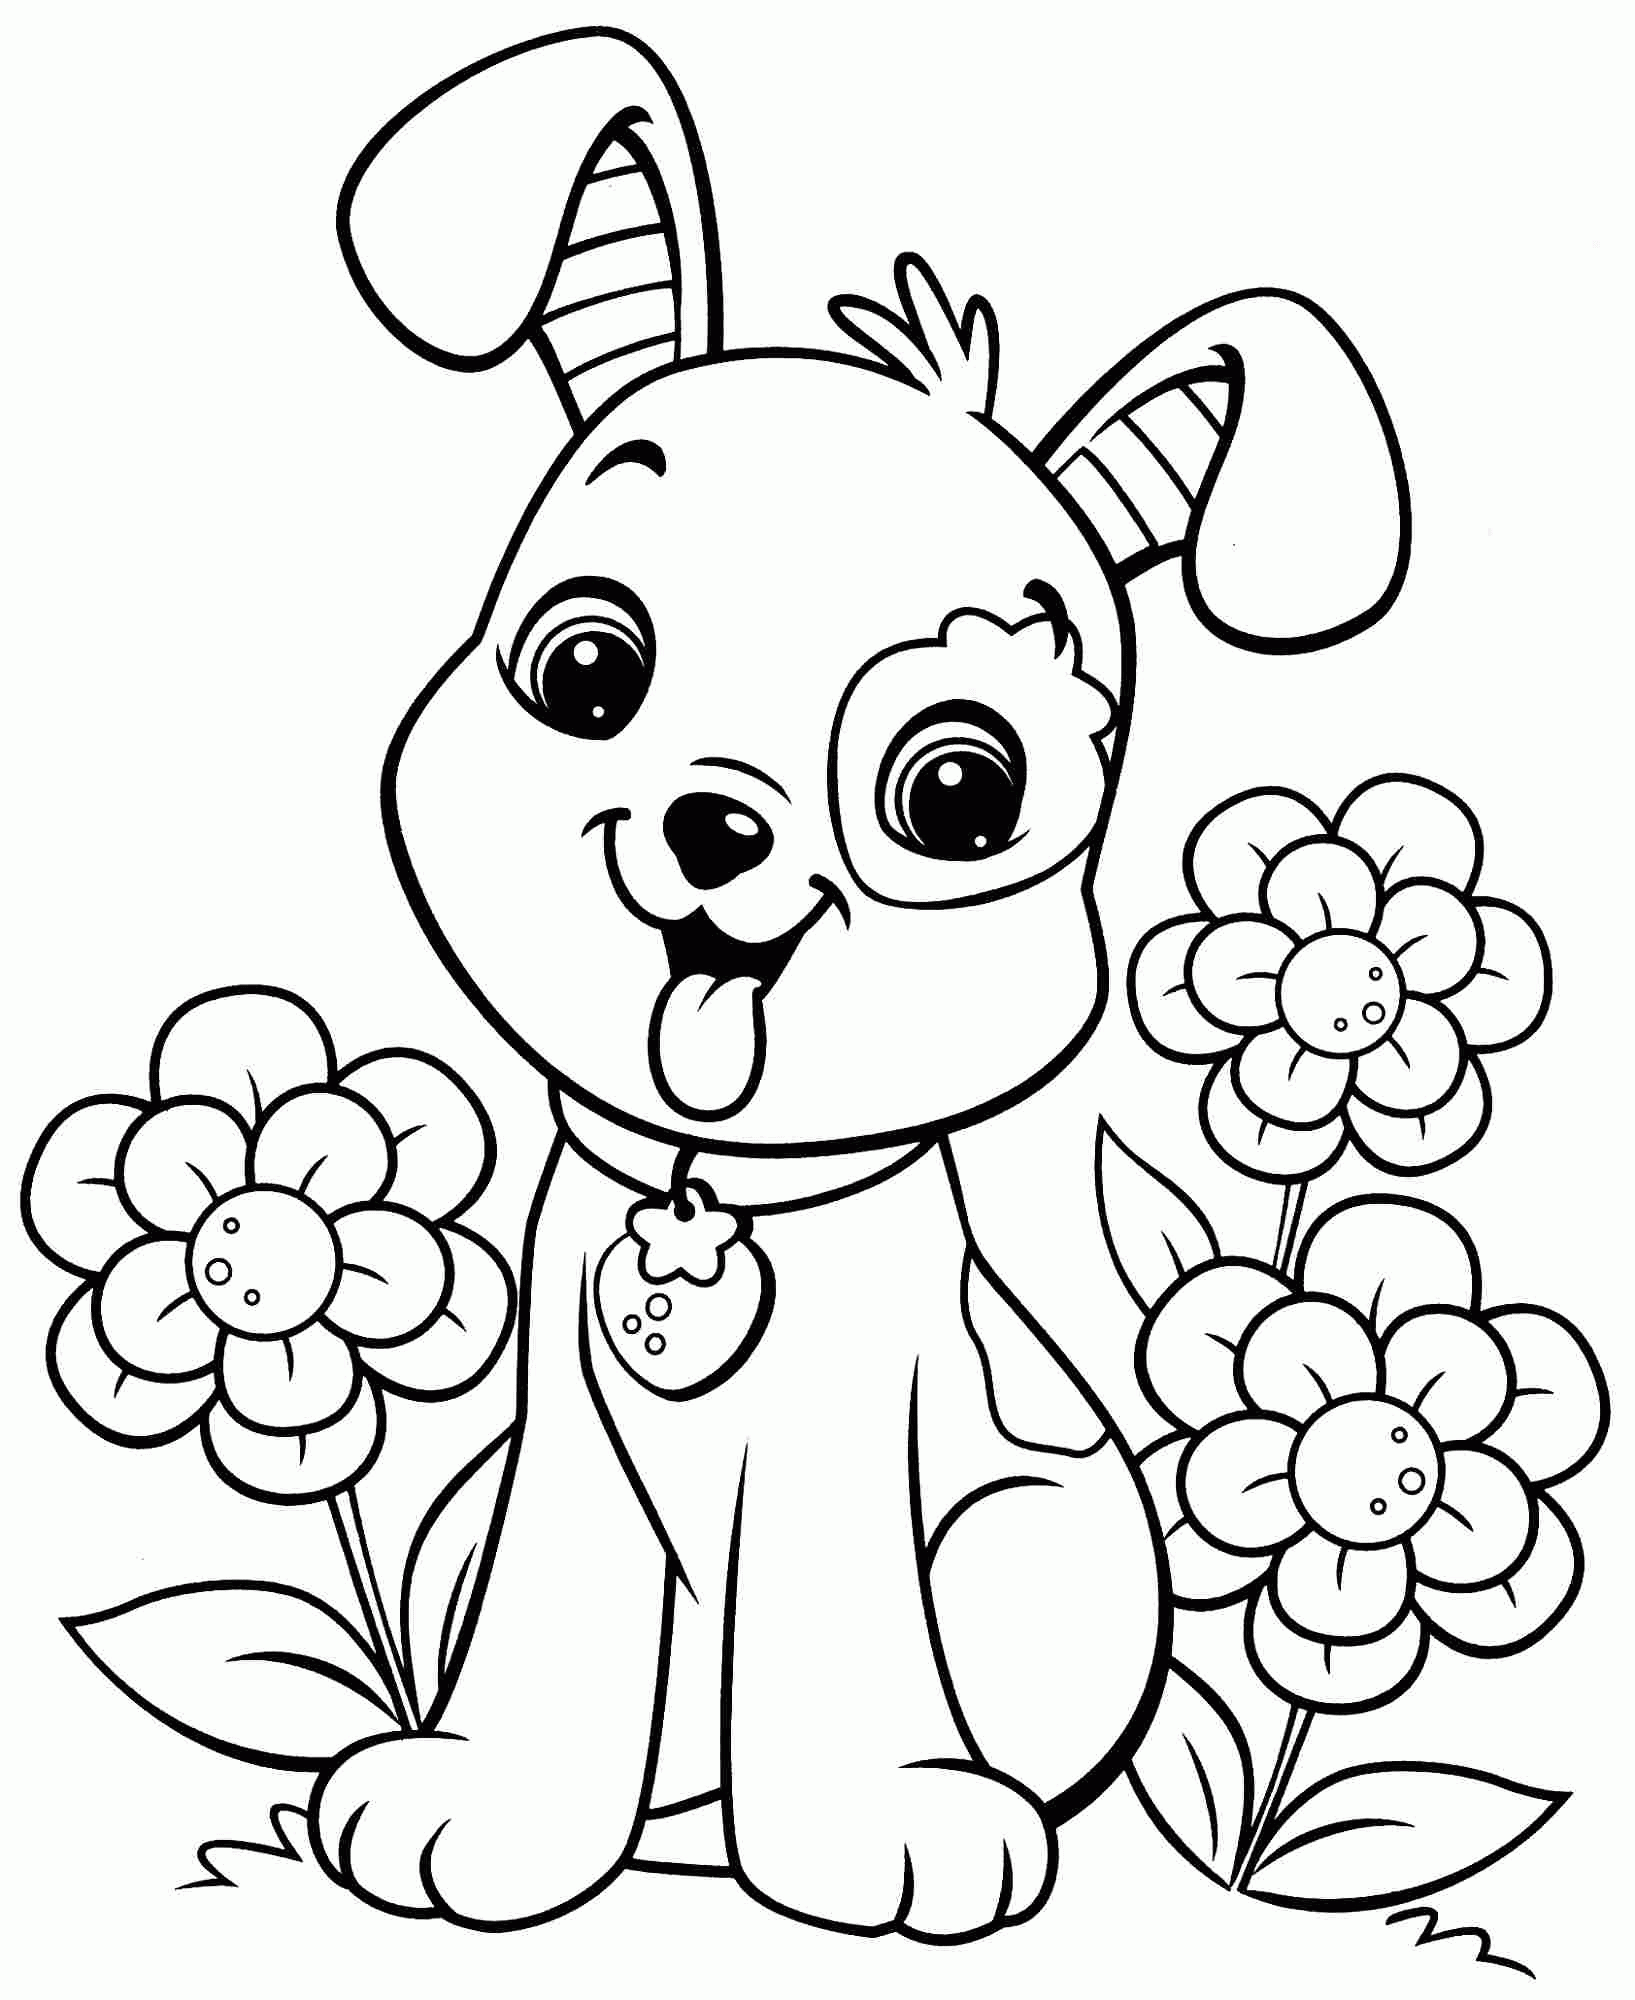 Printable Coloring Pages Cartoon Animals   Coloring Home